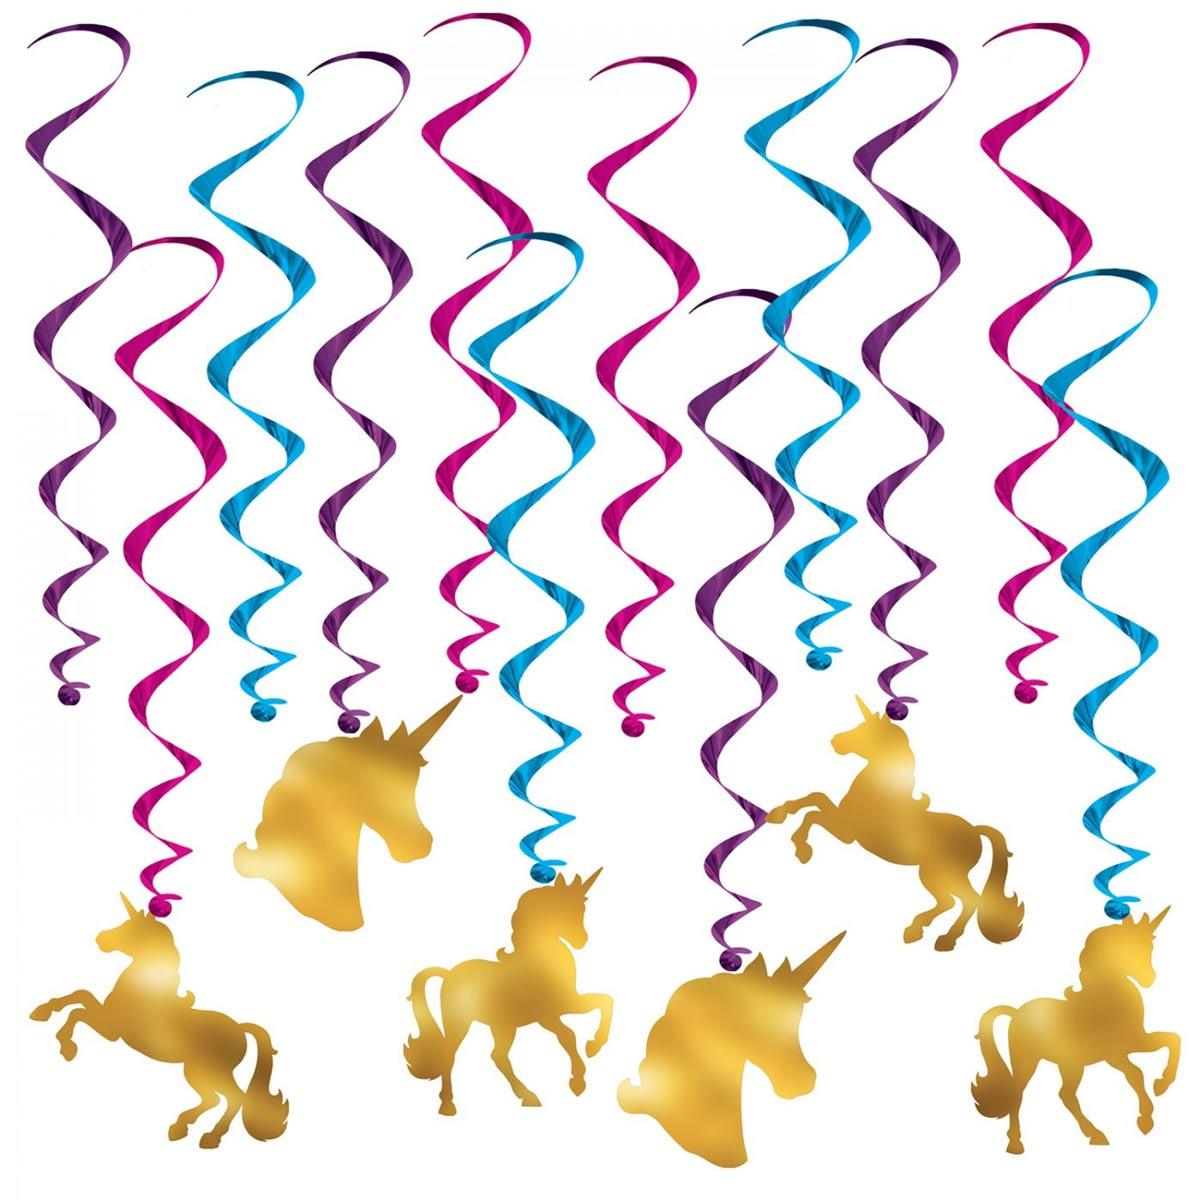 Unicorn Whirl Decorations pk12 - six with unicorns and 6 plain whirls, by Beistle 54971 available here at Karnival Costumes online party shop